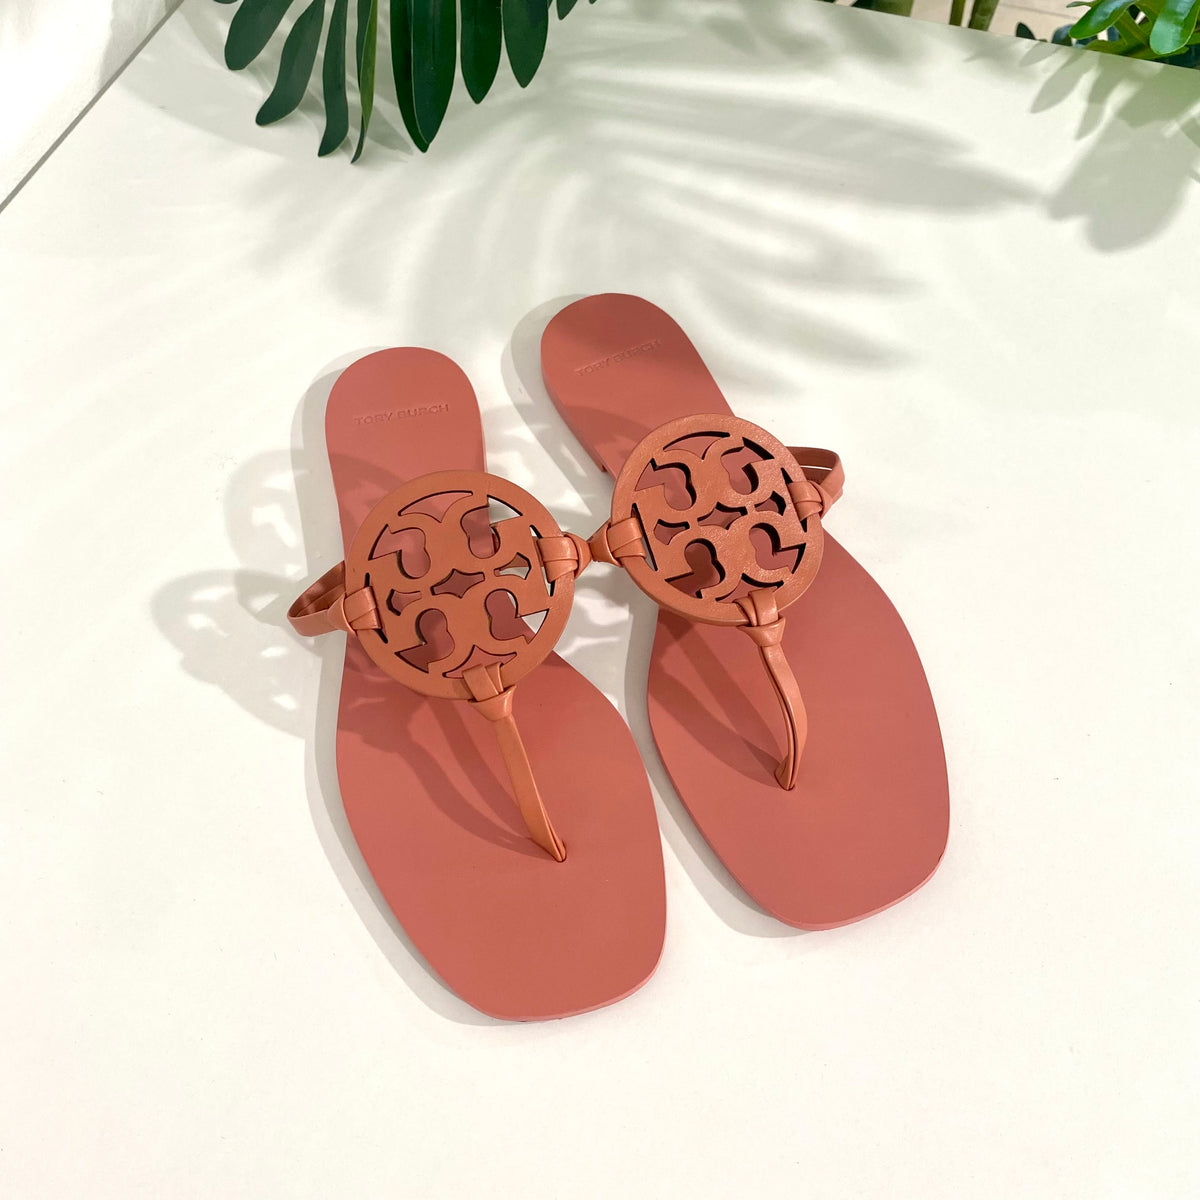 When You Find Pink Tory Burch Sandals, You Buy Them - BLONDIE IN